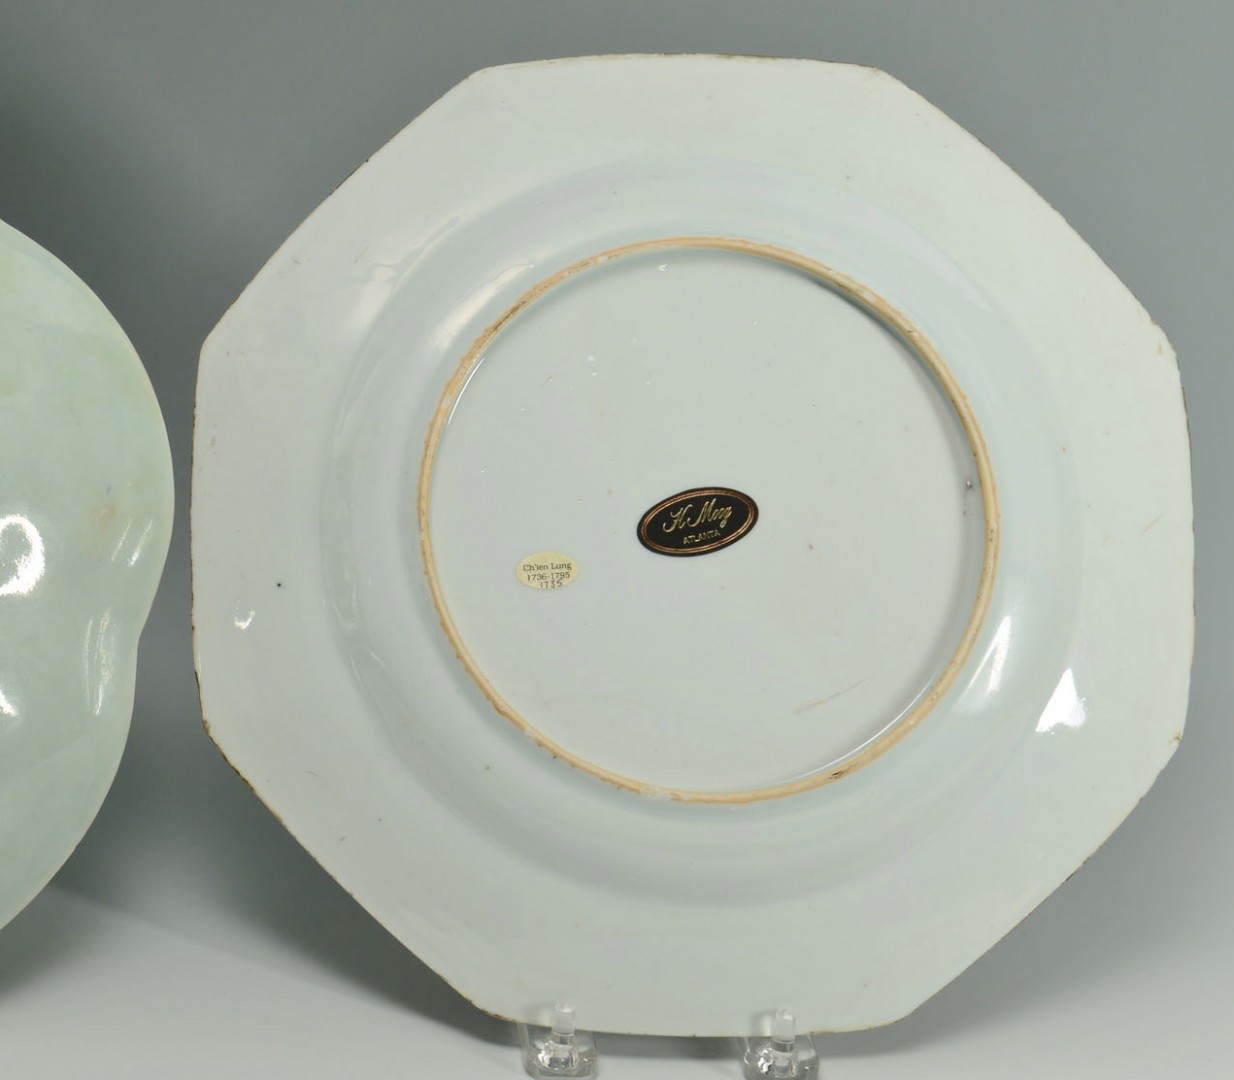 Lot 23: Grouping of 3 Chinese Porcelain Plates